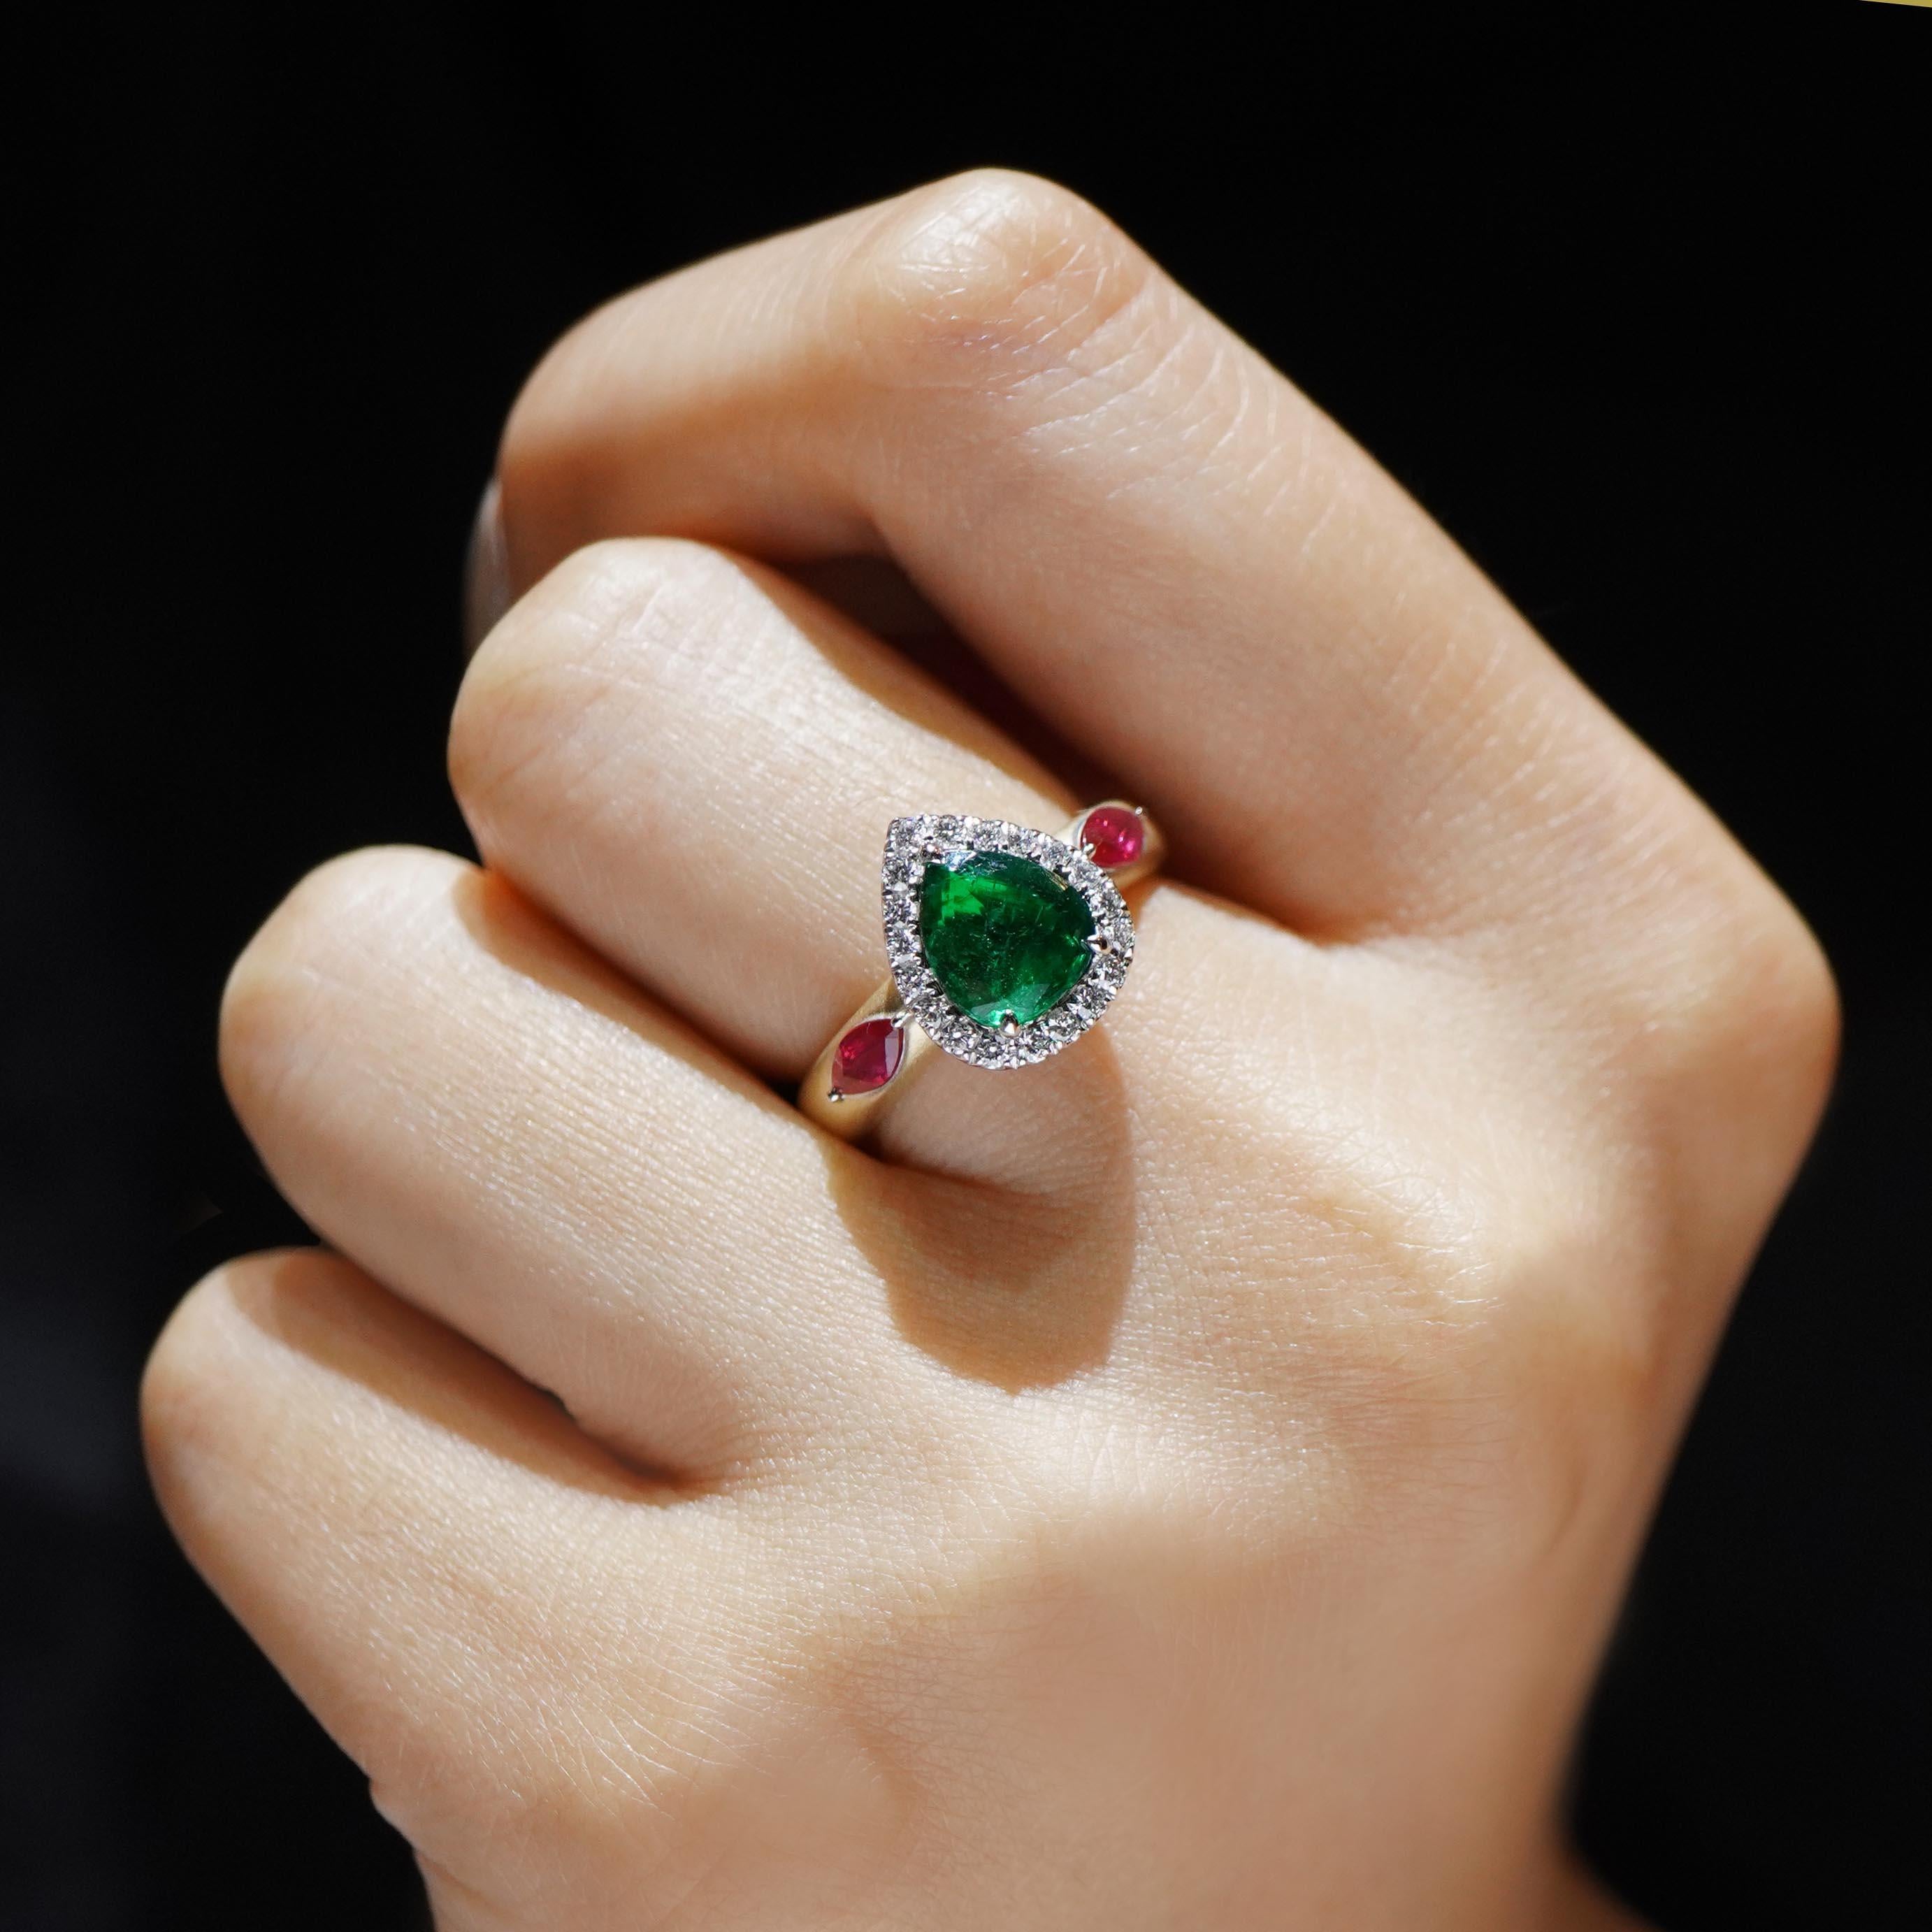 Women's 1.05 Carat Vivid Green Emerald Flanked by Ruby Marquise Matt Finish 18K Gold For Sale